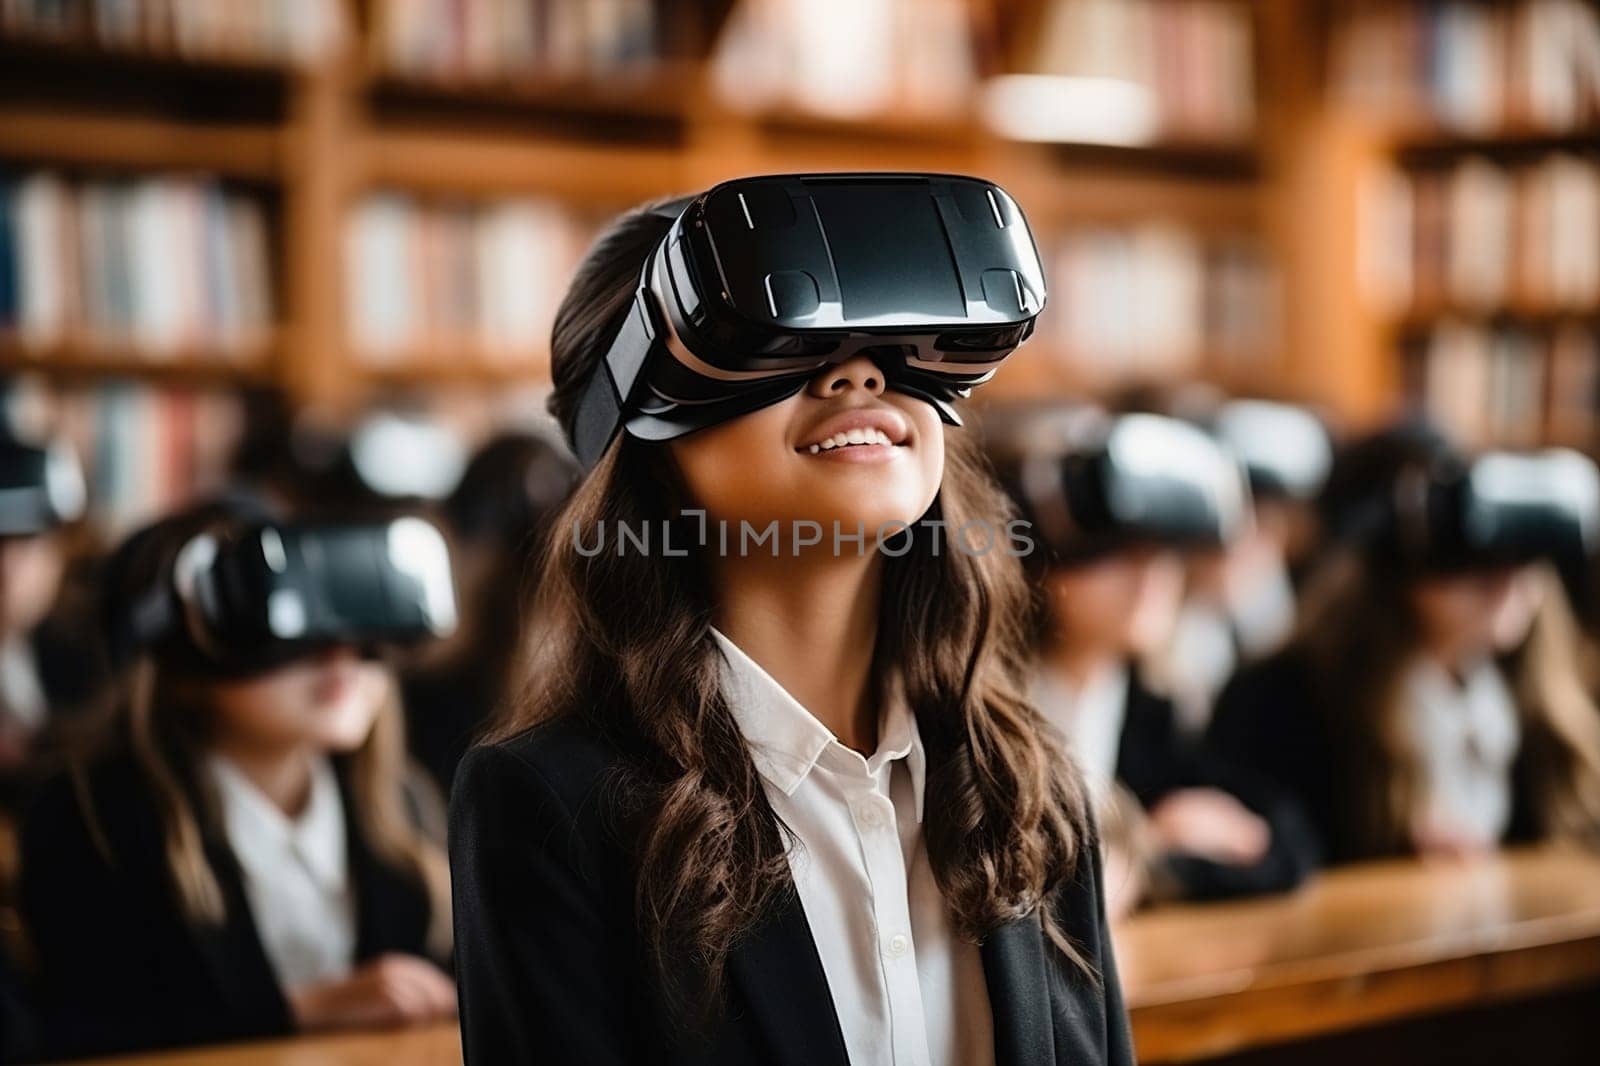 A dark-skinned student in a school uniform wearing virtual reality glasses in a classroom during a lesson.